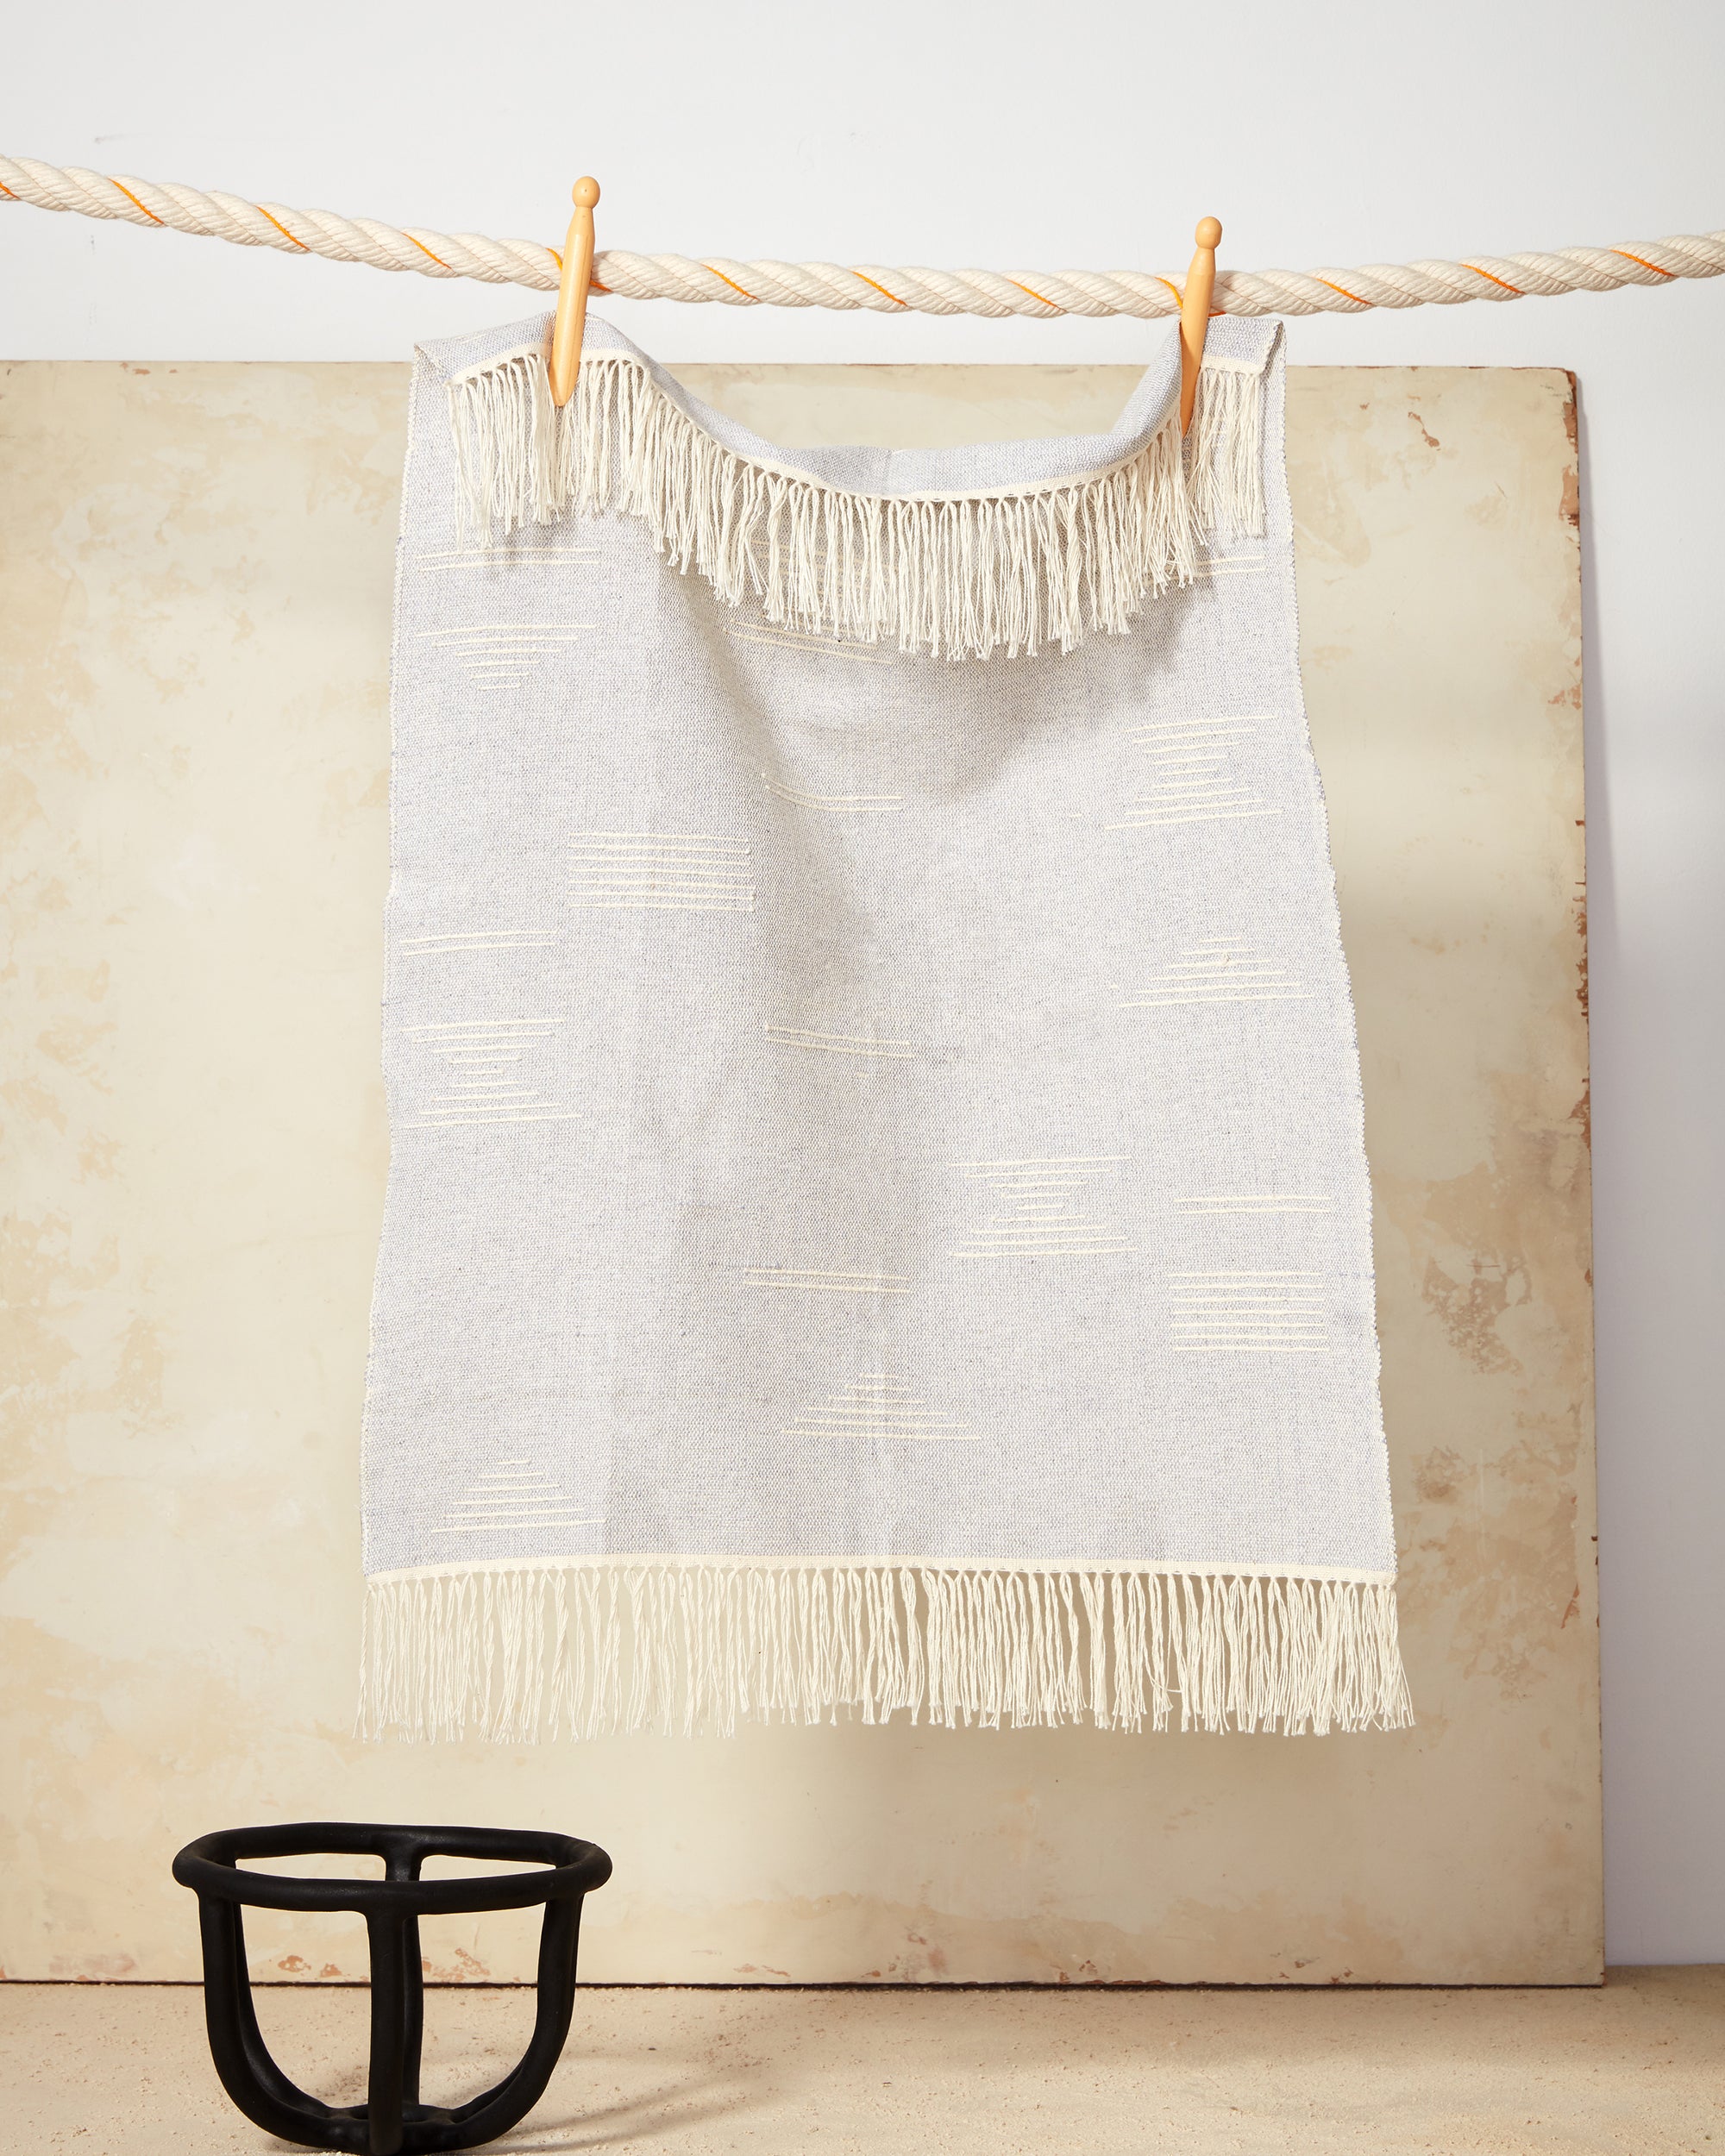 Ethically handwoven cotton tea towel by MINNA with abstract geometric shapes.